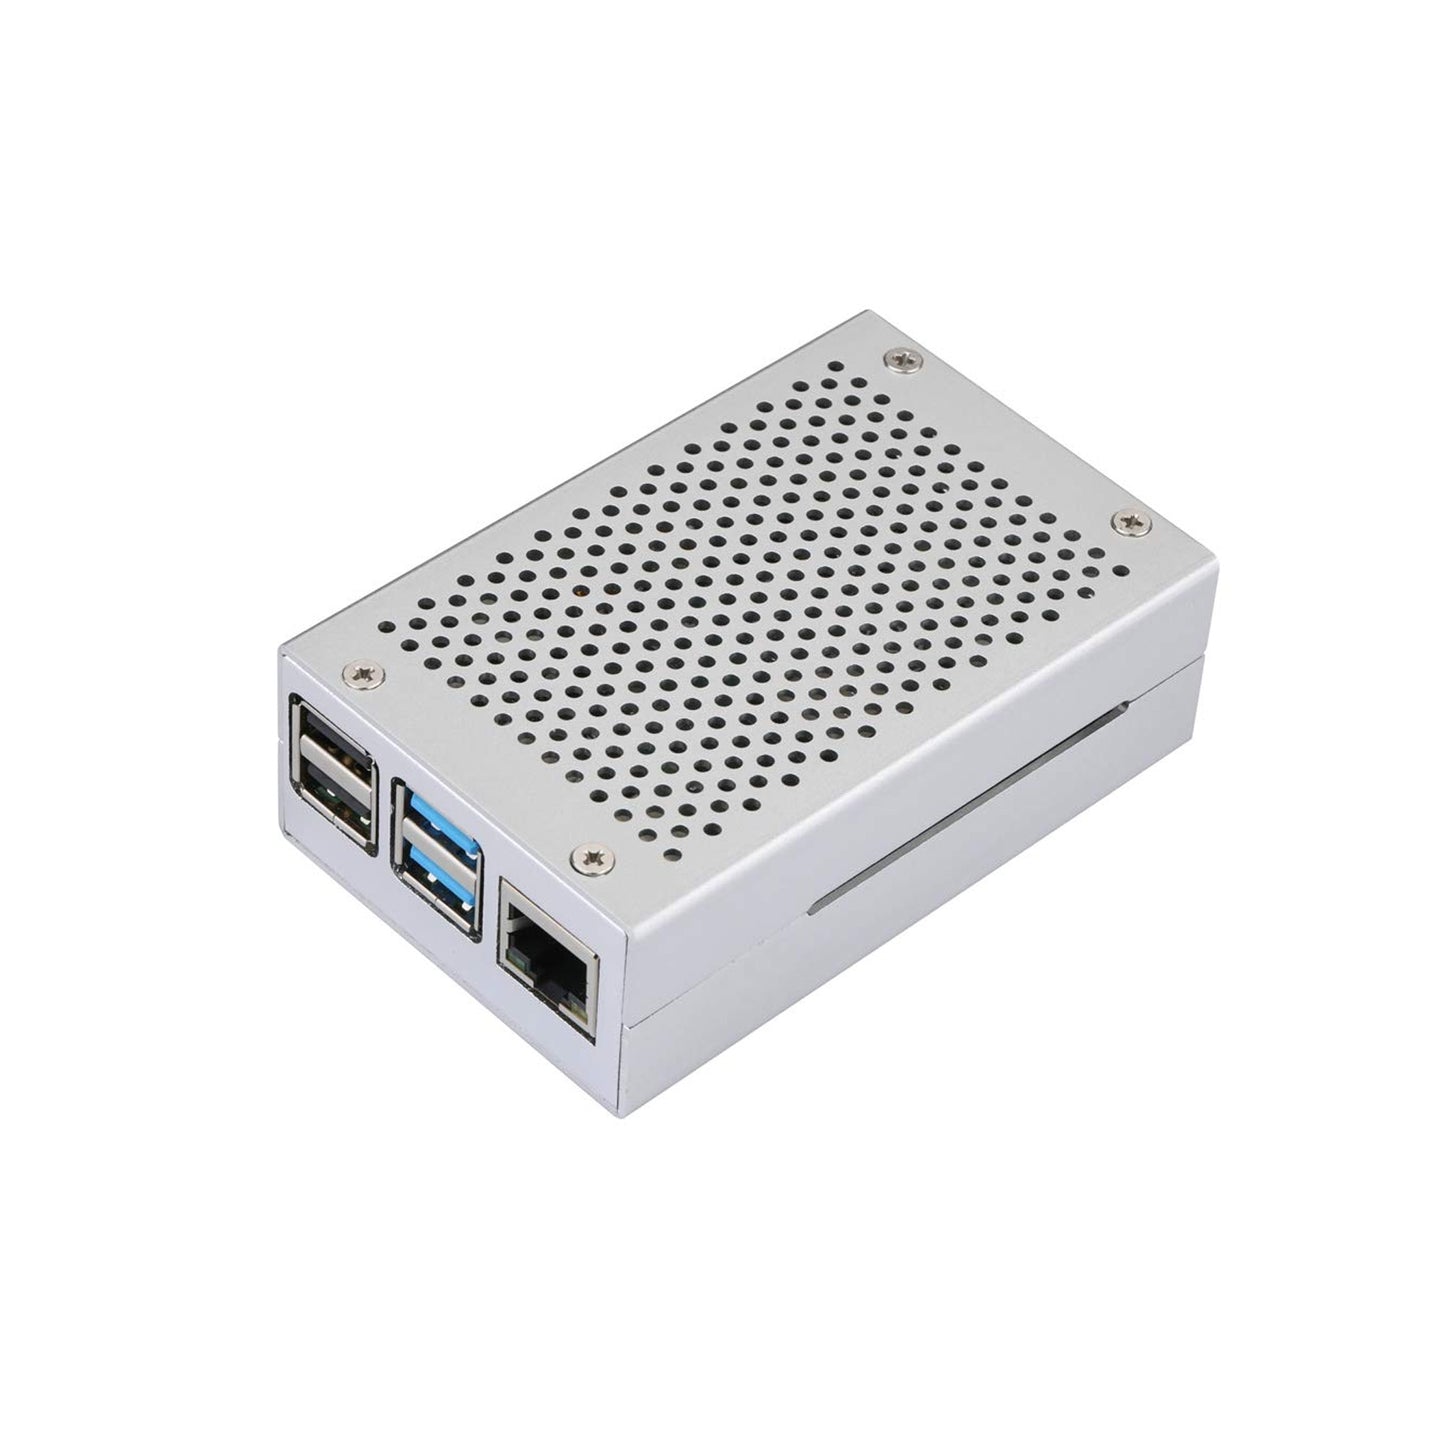 Raspberry Pi 4 Metal Case Aluminum Raspberry Pi 4 Case with Cooling Fan for Raspberry Pi 4 Model B, B+ (Silver) - RS2450 - REES52